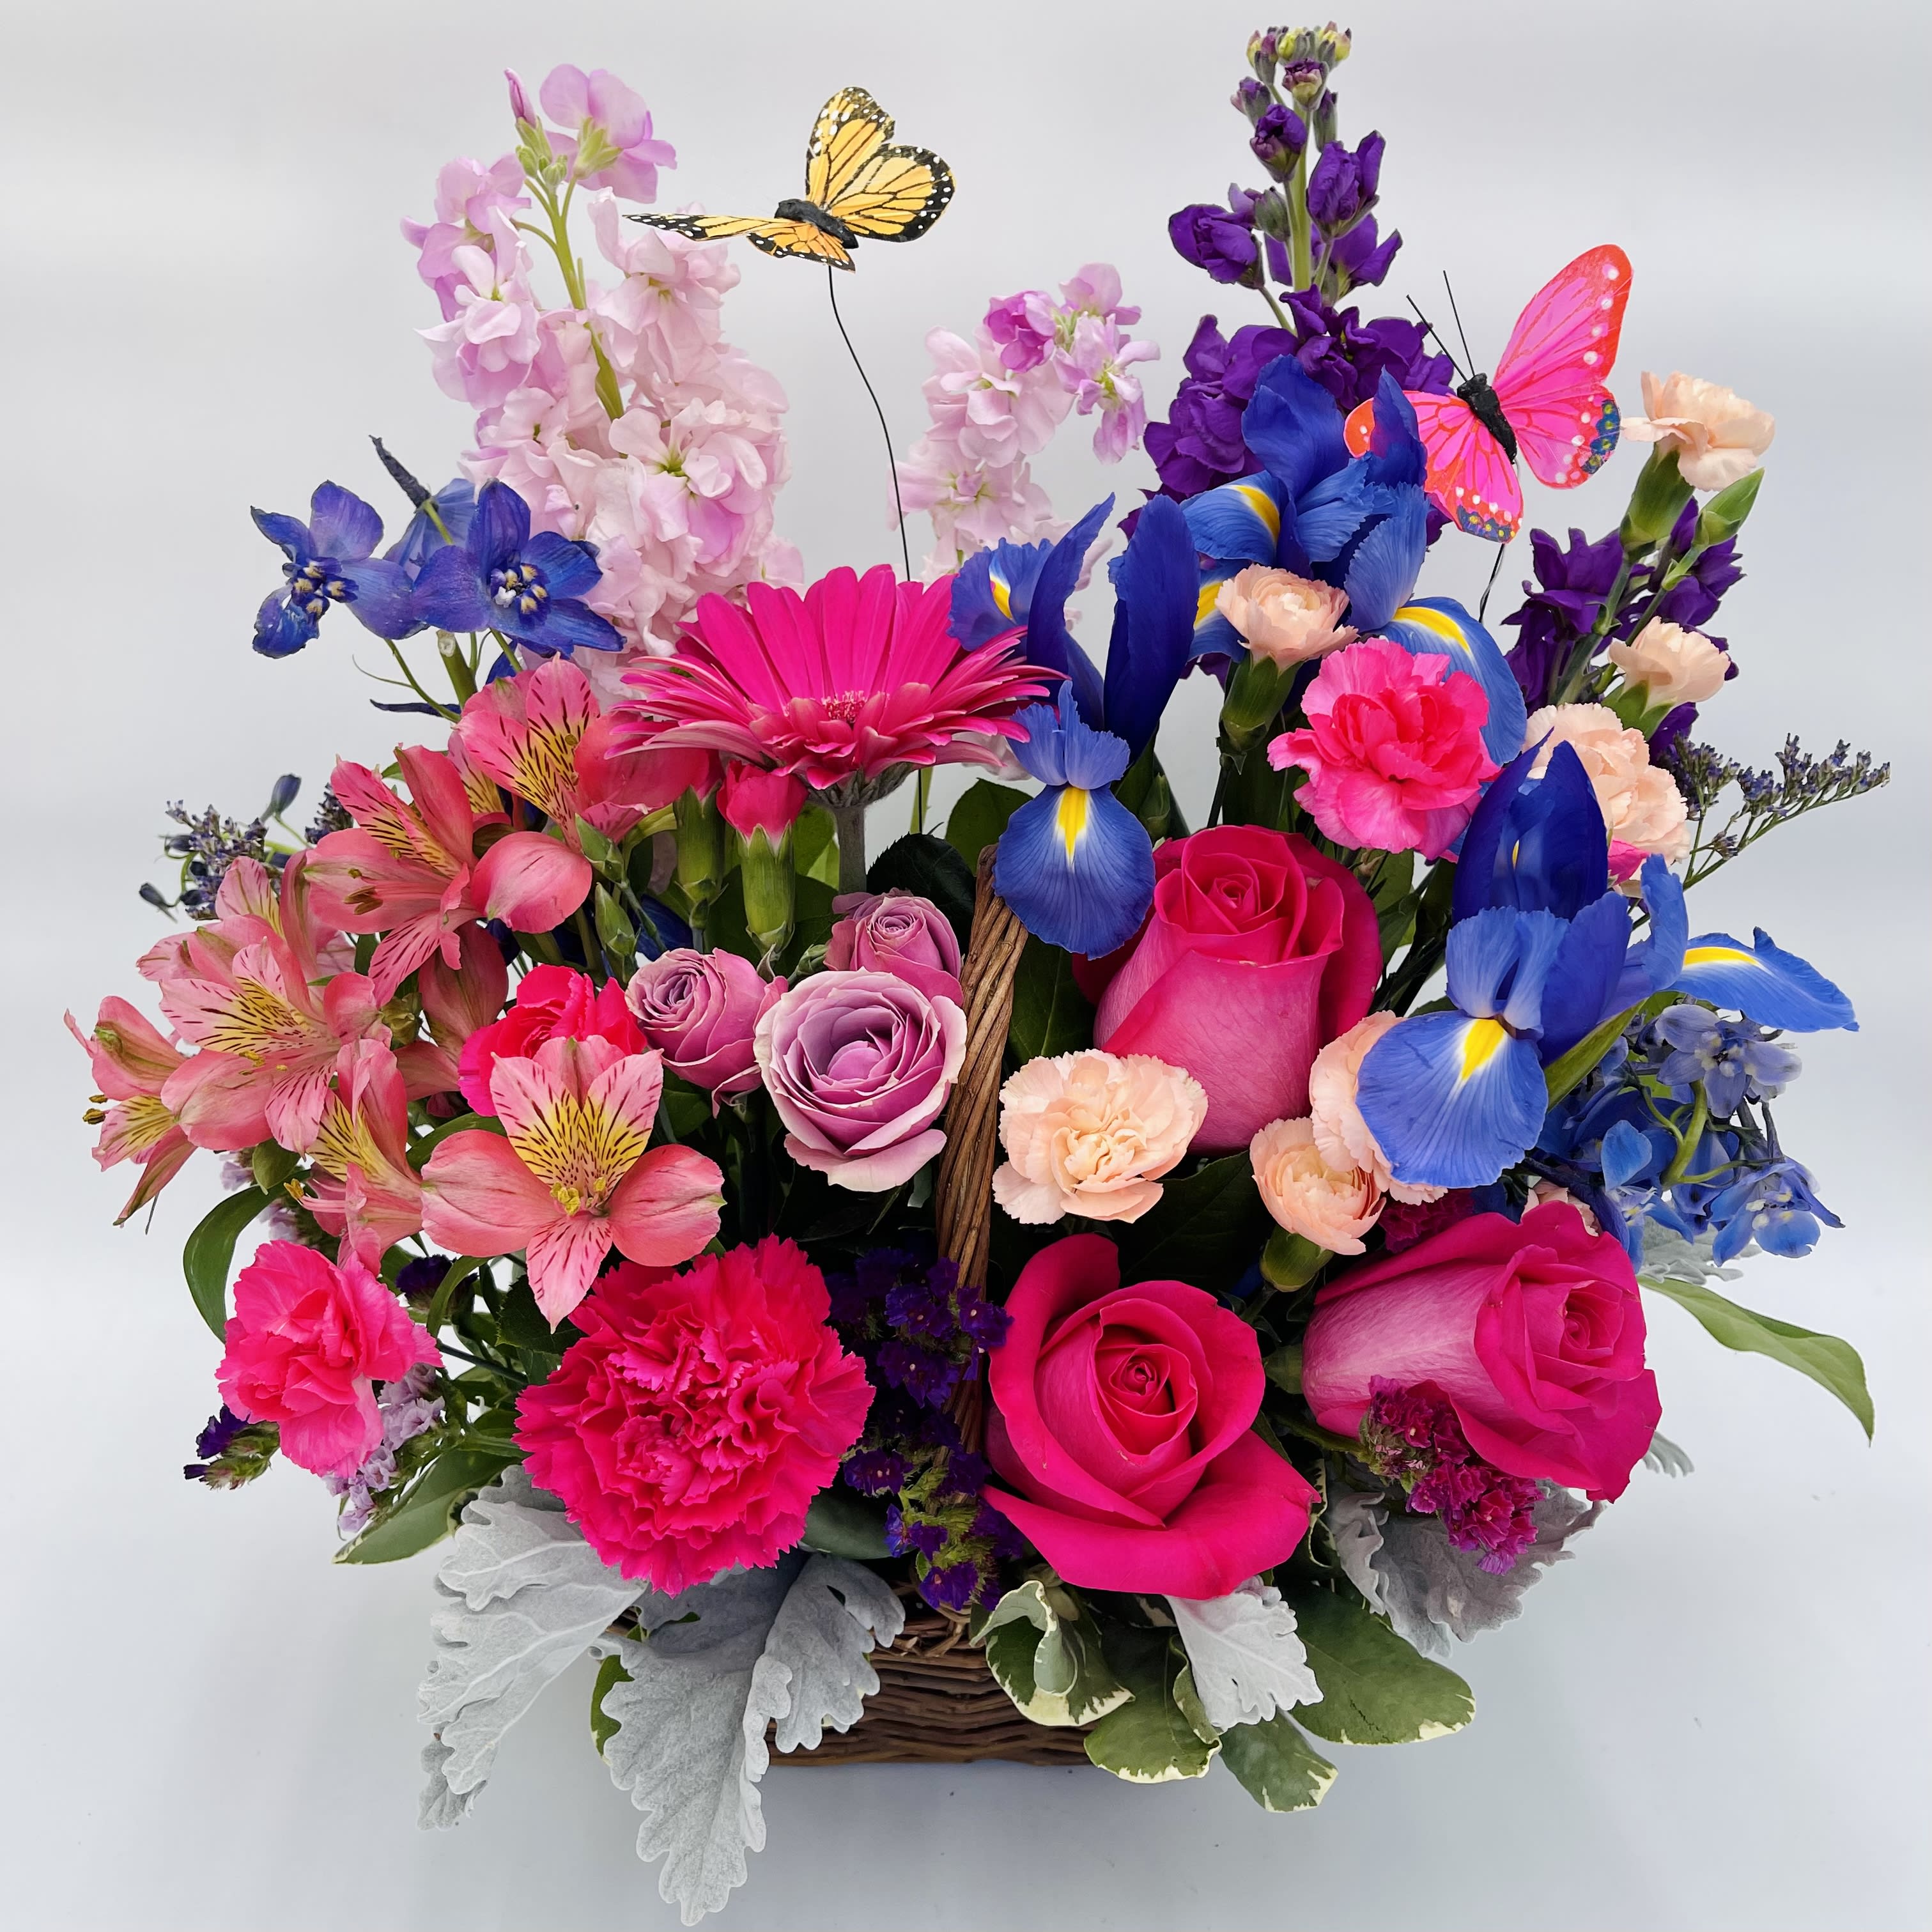 Country Meadow Basket - Enjoy the beauty of the countryside blooms with our County Meadow Basket.  Celebrate springtime with friends and loved ones with this arrangement of pink and purple blooms with playful butterflies floating above.  Basket includes roses, carnations, alstromeria, iris, stock, and assorted greenery.  Our florists handcraft these arrangements to be as fresh as possible, so certain flower varieties and colors may vary.